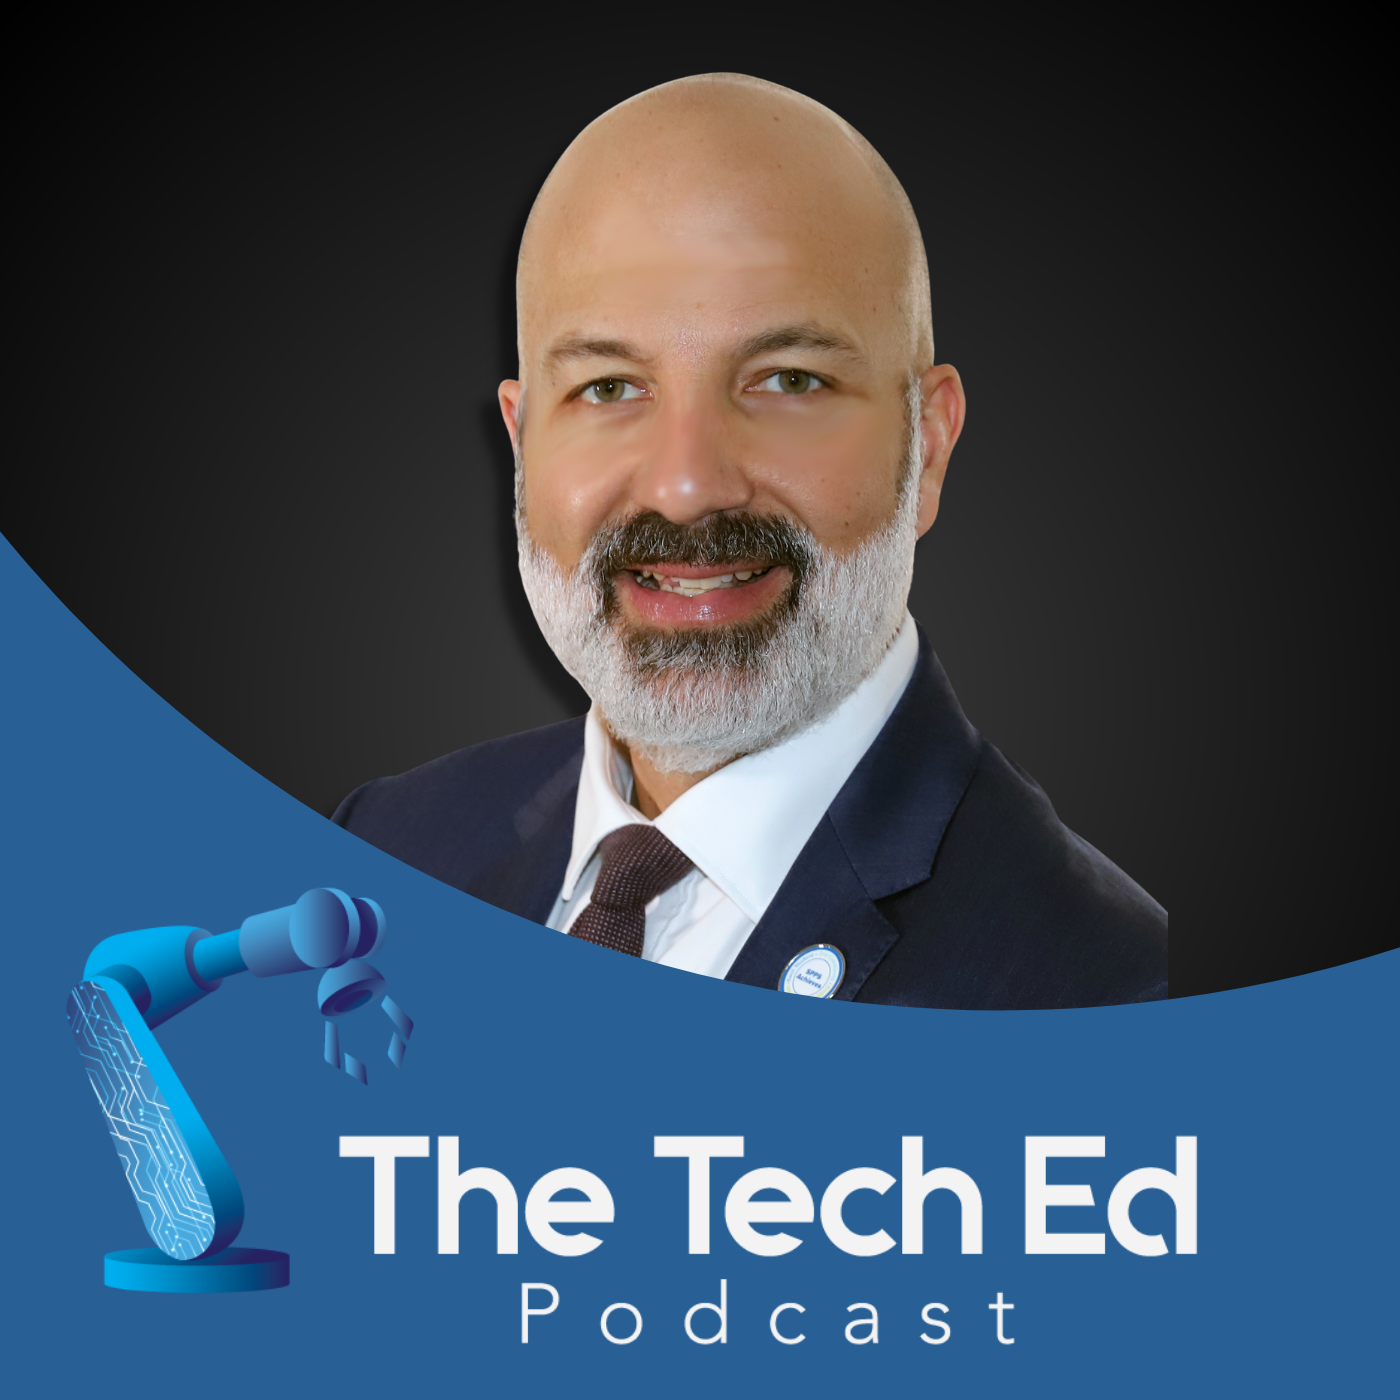 Joe Gothard on The TechEd Podcast